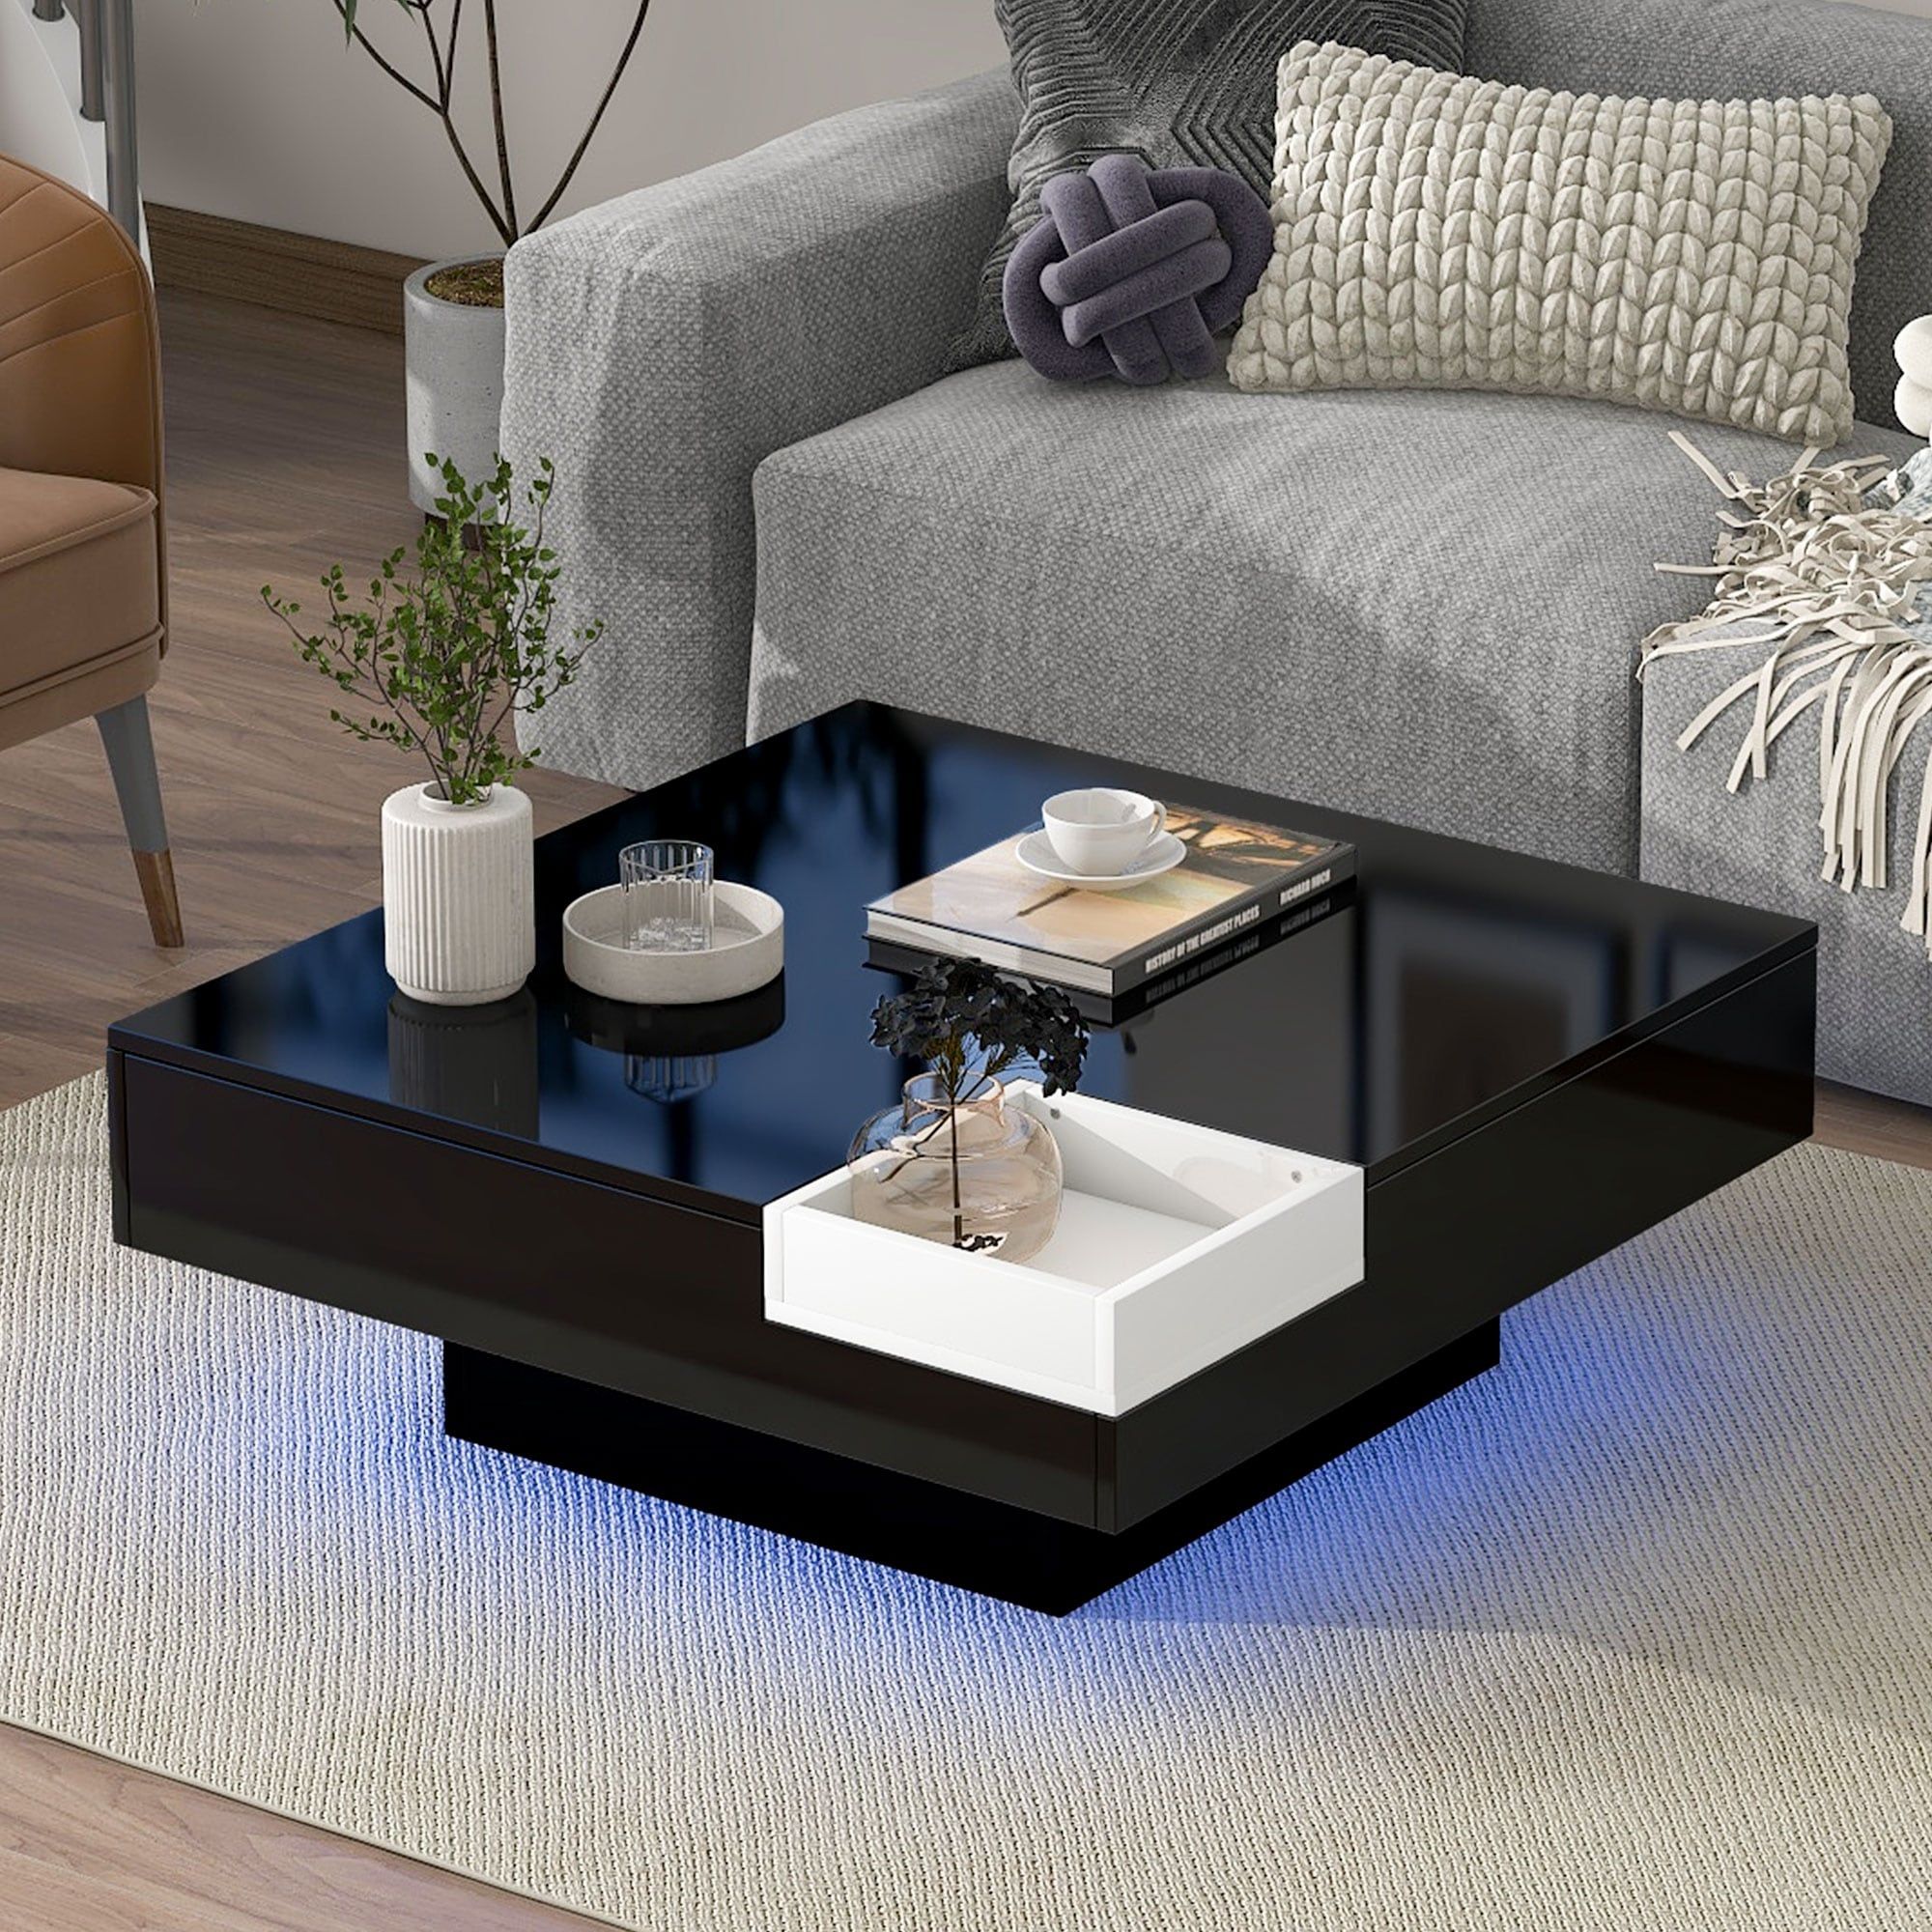 Square Coffee Table With Detachable Tray And Plug In 16 Color Led Strip  Lights Remote Control – Bed Bath & Beyond – 37367161 Within Detachable Tray Coffee Tables (Photo 2 of 15)